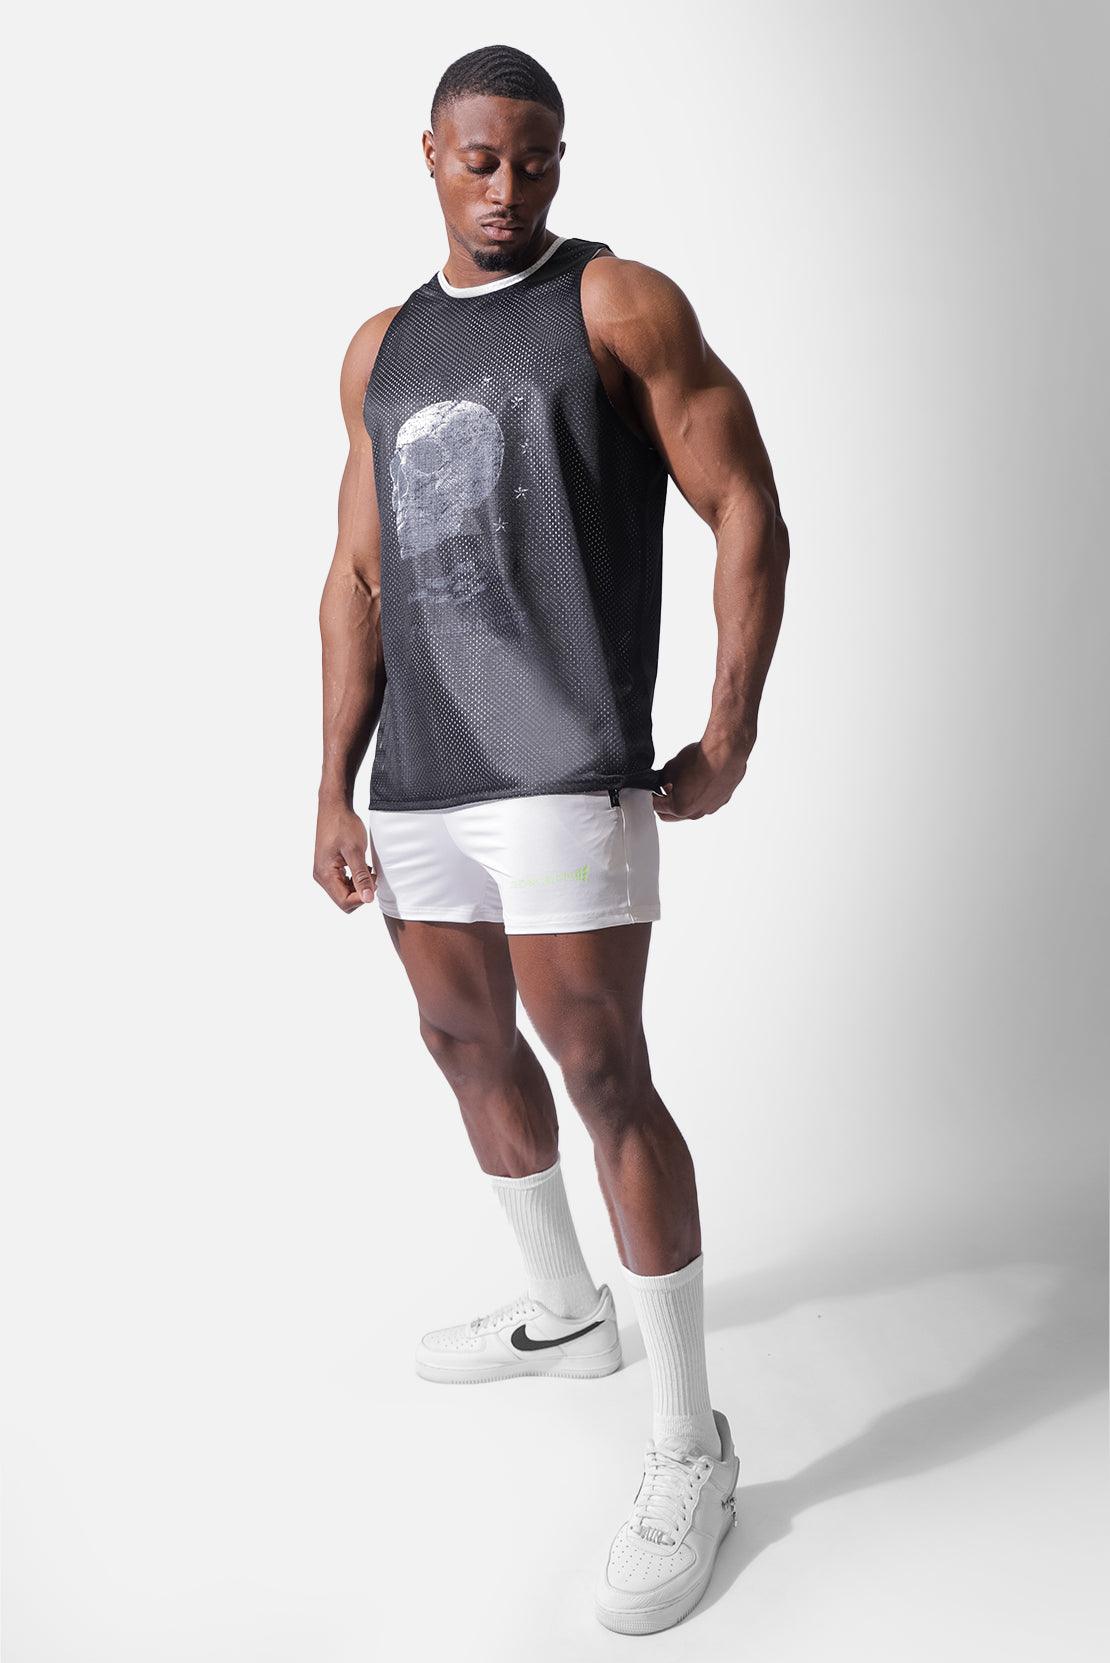 Workout Tank Tops for Men | Bodybuilding & Fitness Gym Wear | Jed